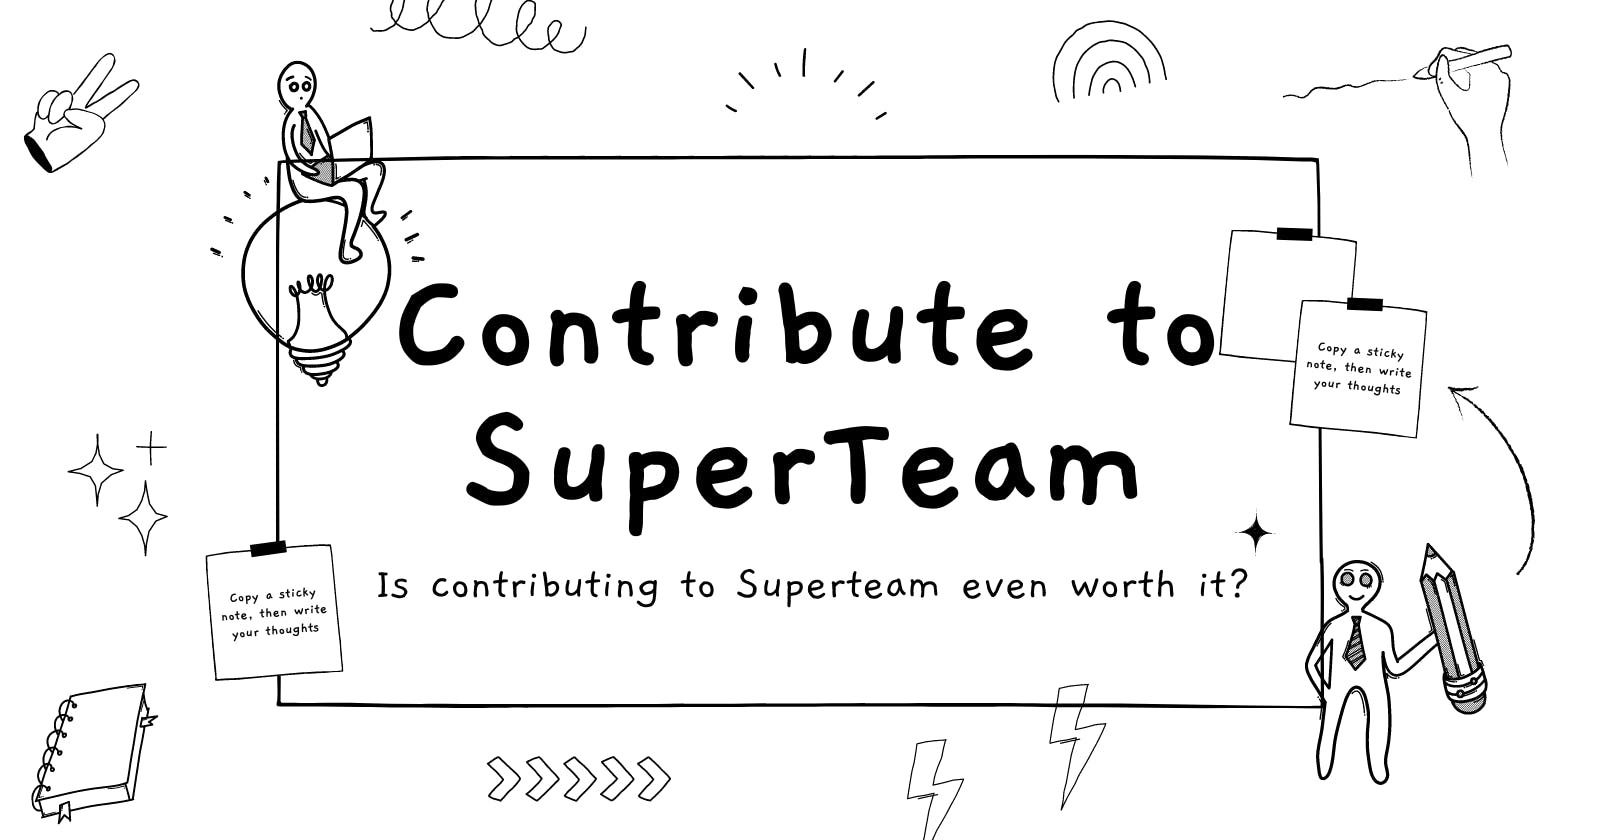 Is contributing to Superteam even worth it?